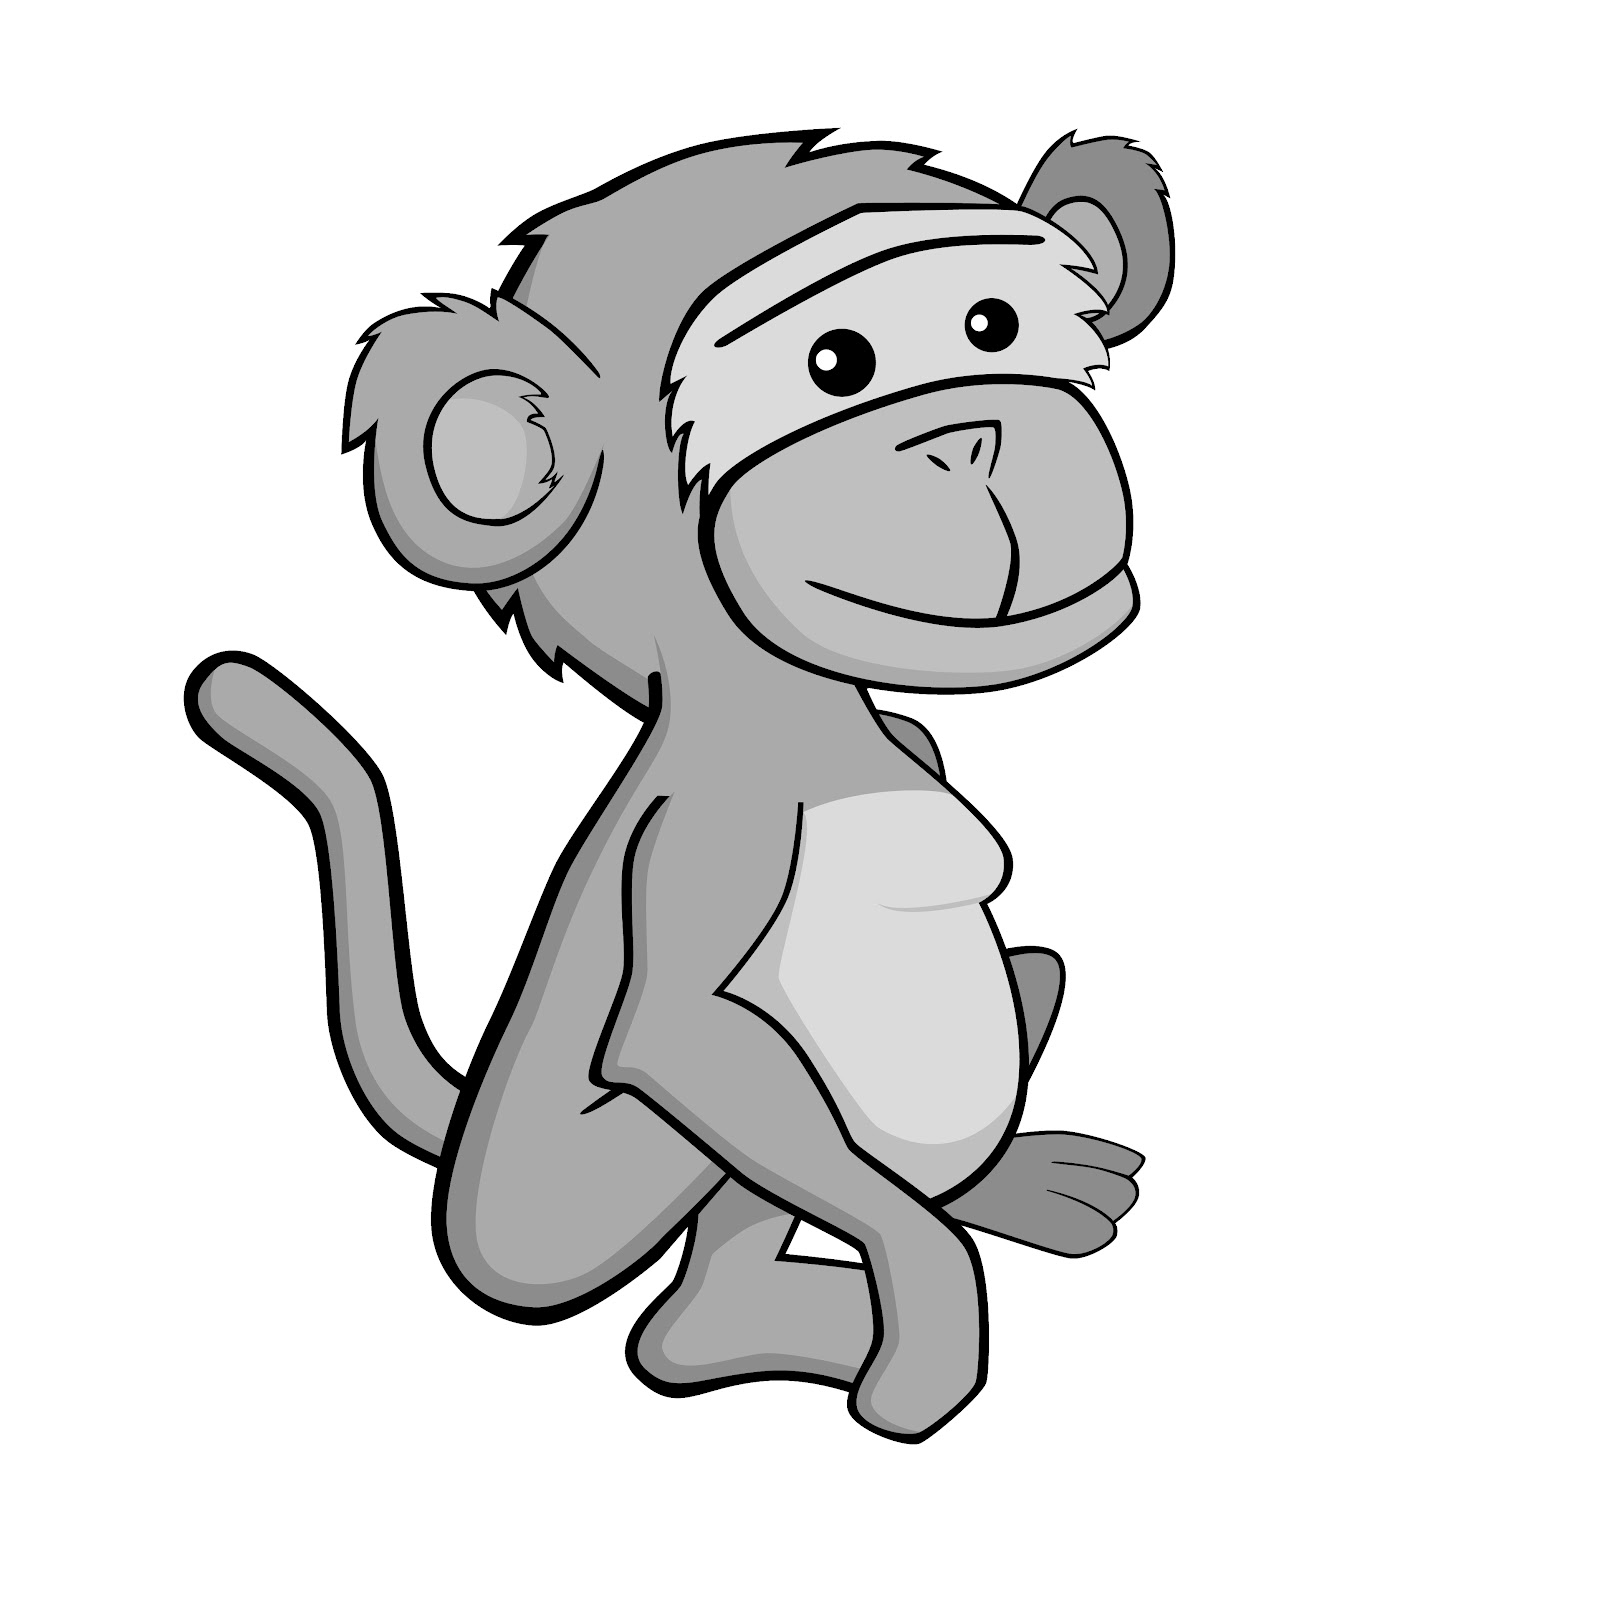 Monkey Clipart Black And White - ClipArt Best